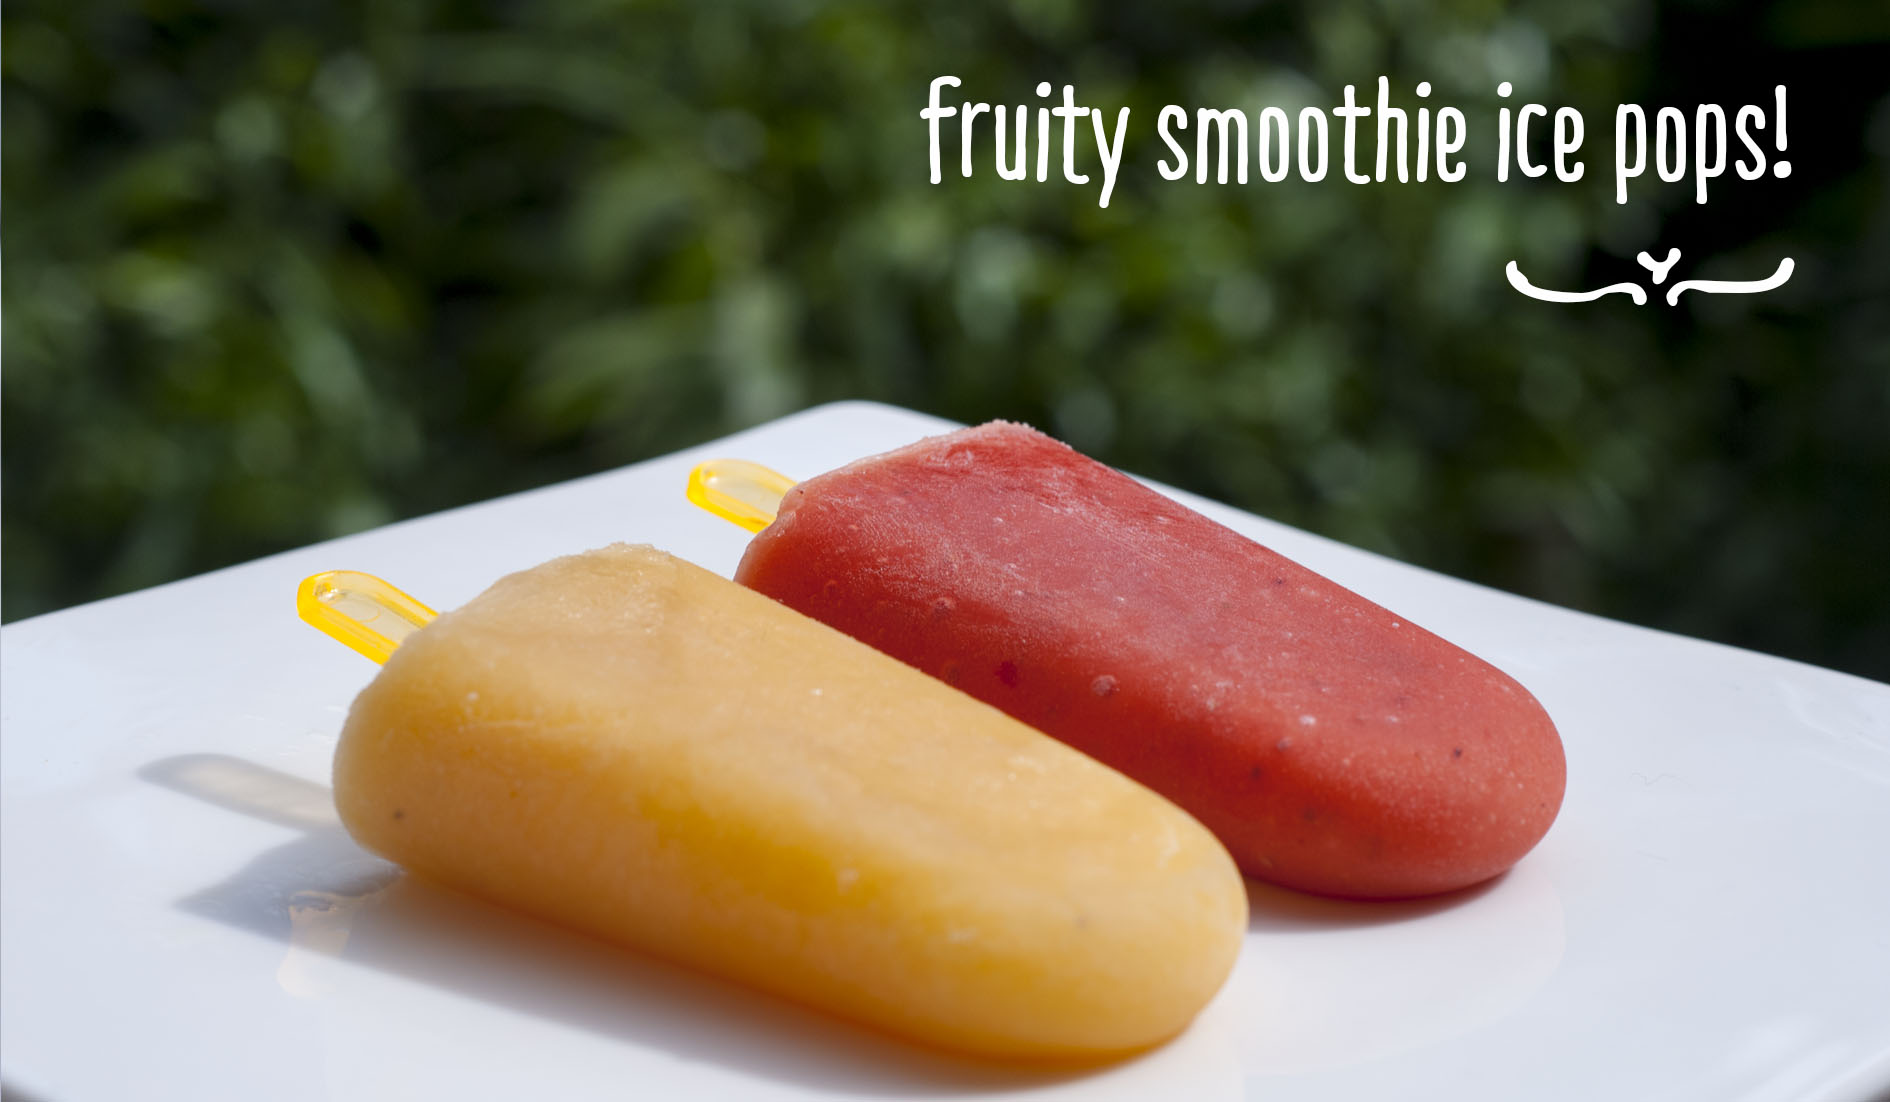 Homemade fruity smoothie ice pops